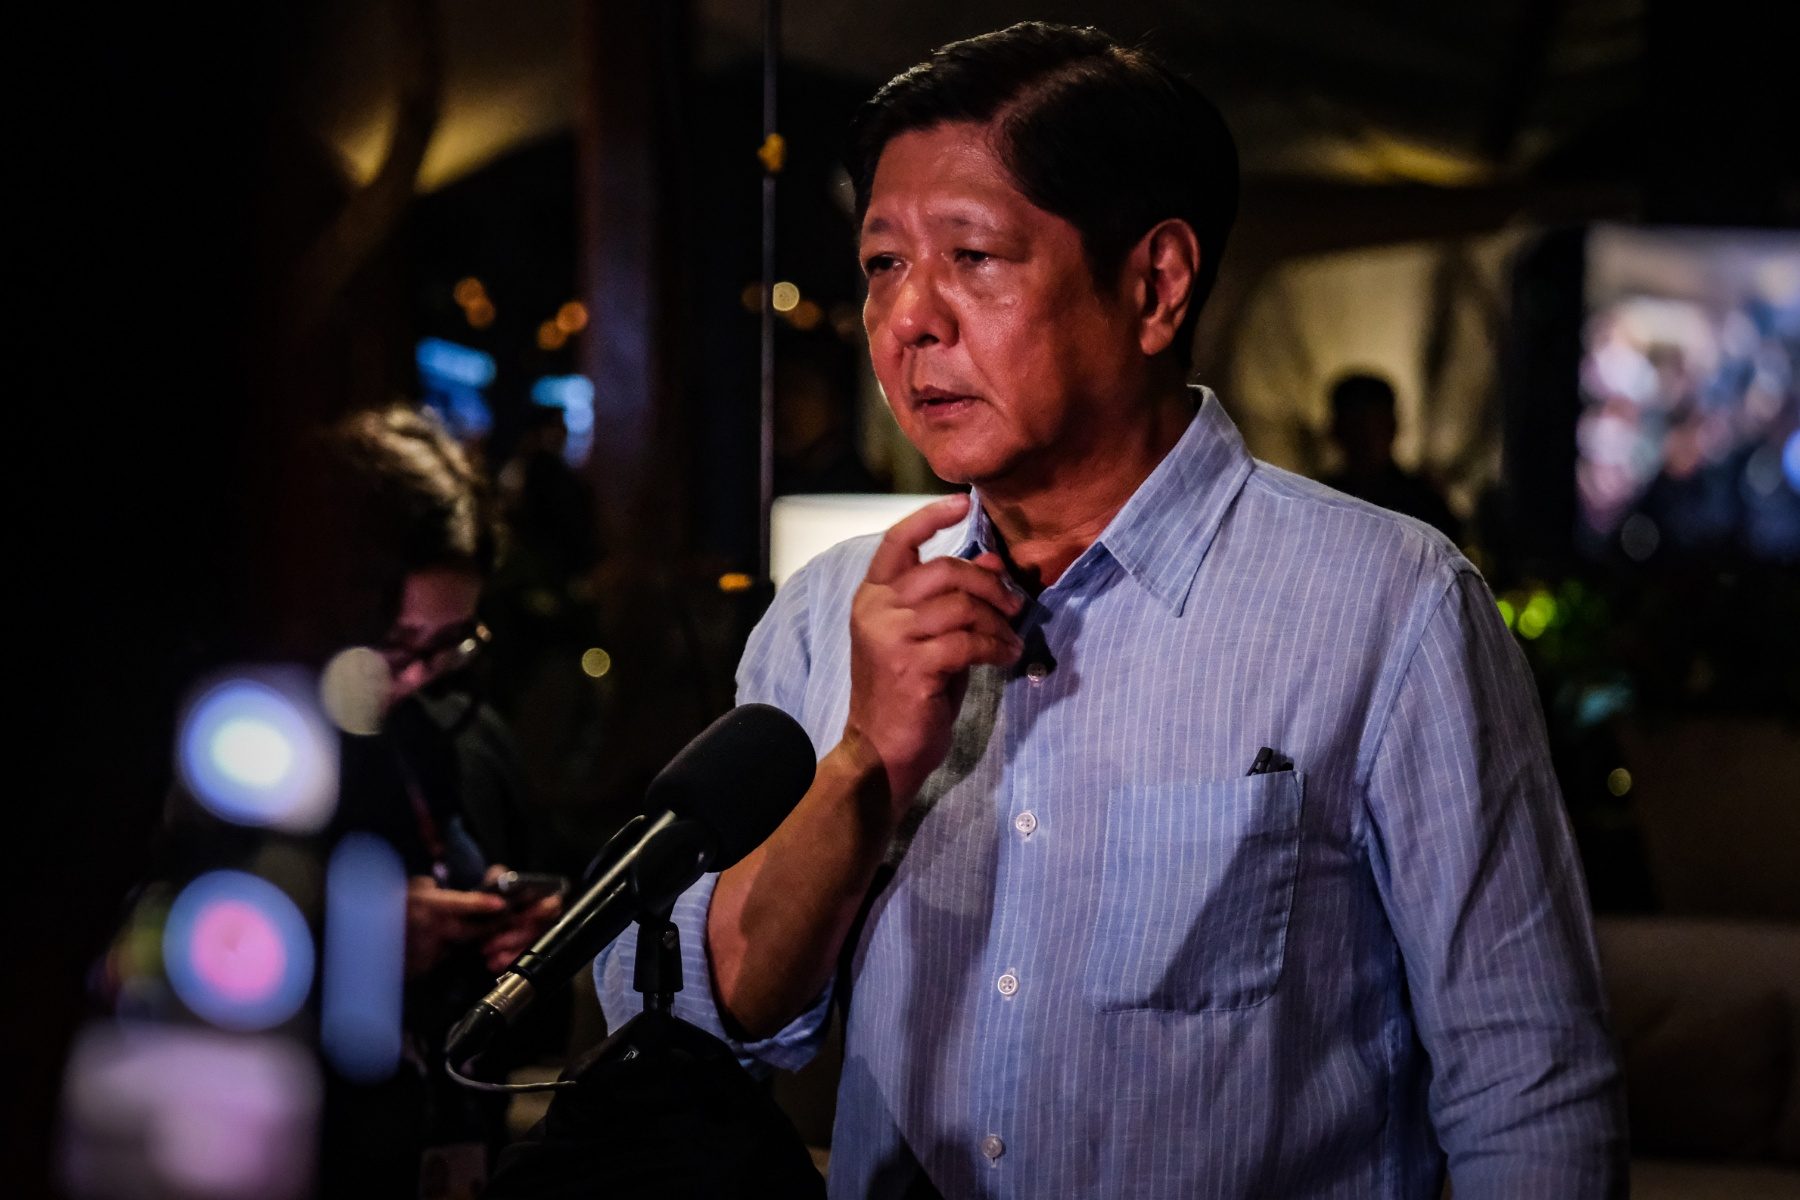 Philippines still seeking clemency for Mary Jane Veloso – Marcos